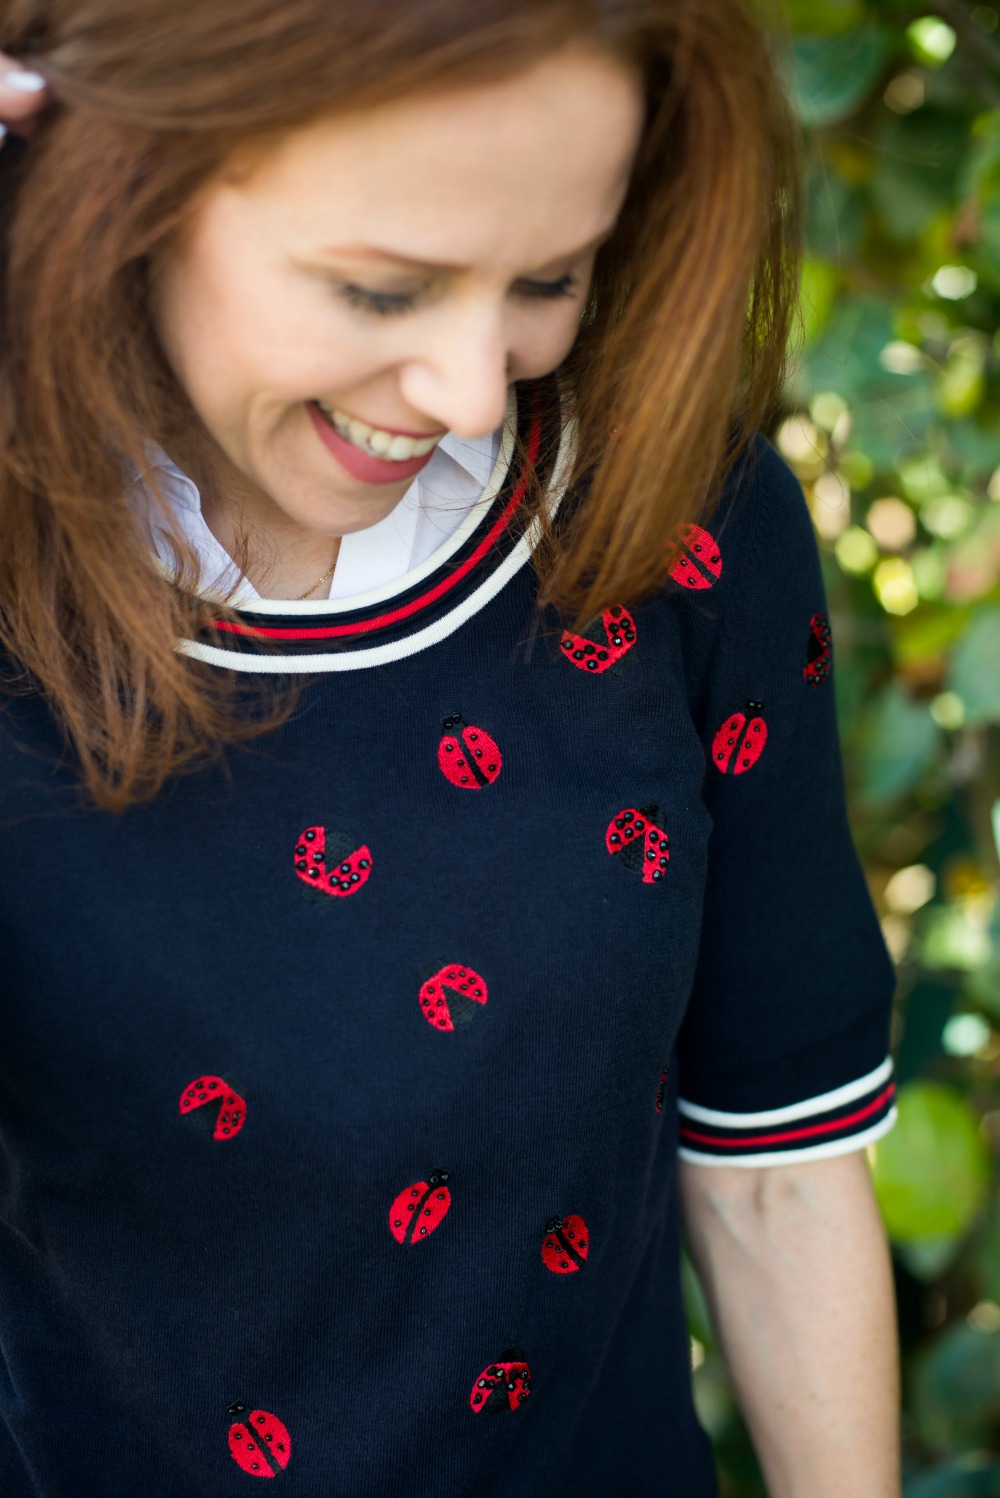 Alyson Seligman styling Talbots x Oprah Magazine ladybug collection  - Talbots collection with Oprah Magazine Collection 2018 - Popular Florida style blogger The Modern Savvy